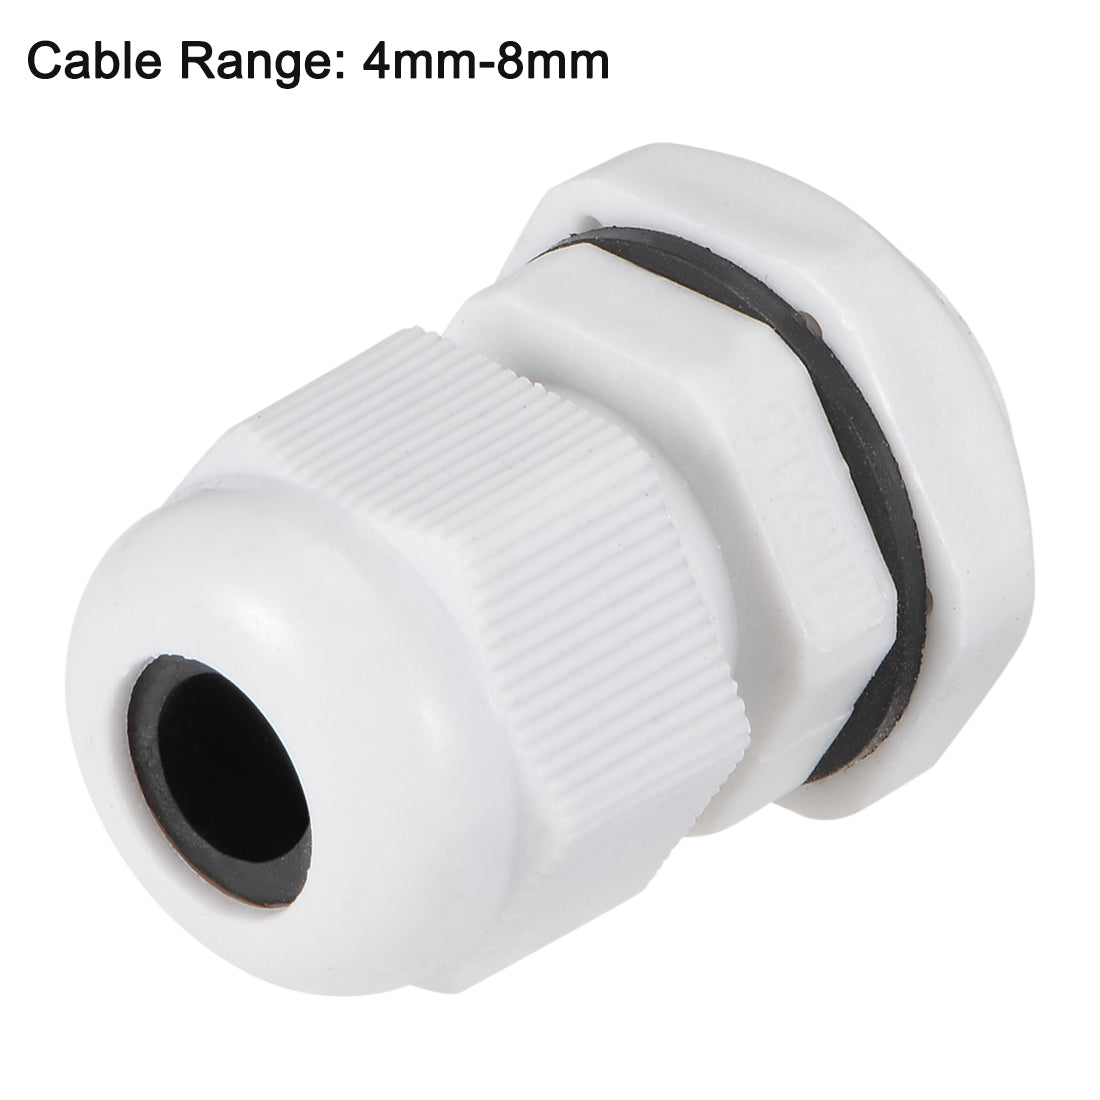 uxcell Uxcell M16x1.5 Cable Gland 4mm-8mm Wire Hole Waterproof Nylon Joint Adjustable Locknut with Washer White 10pcs